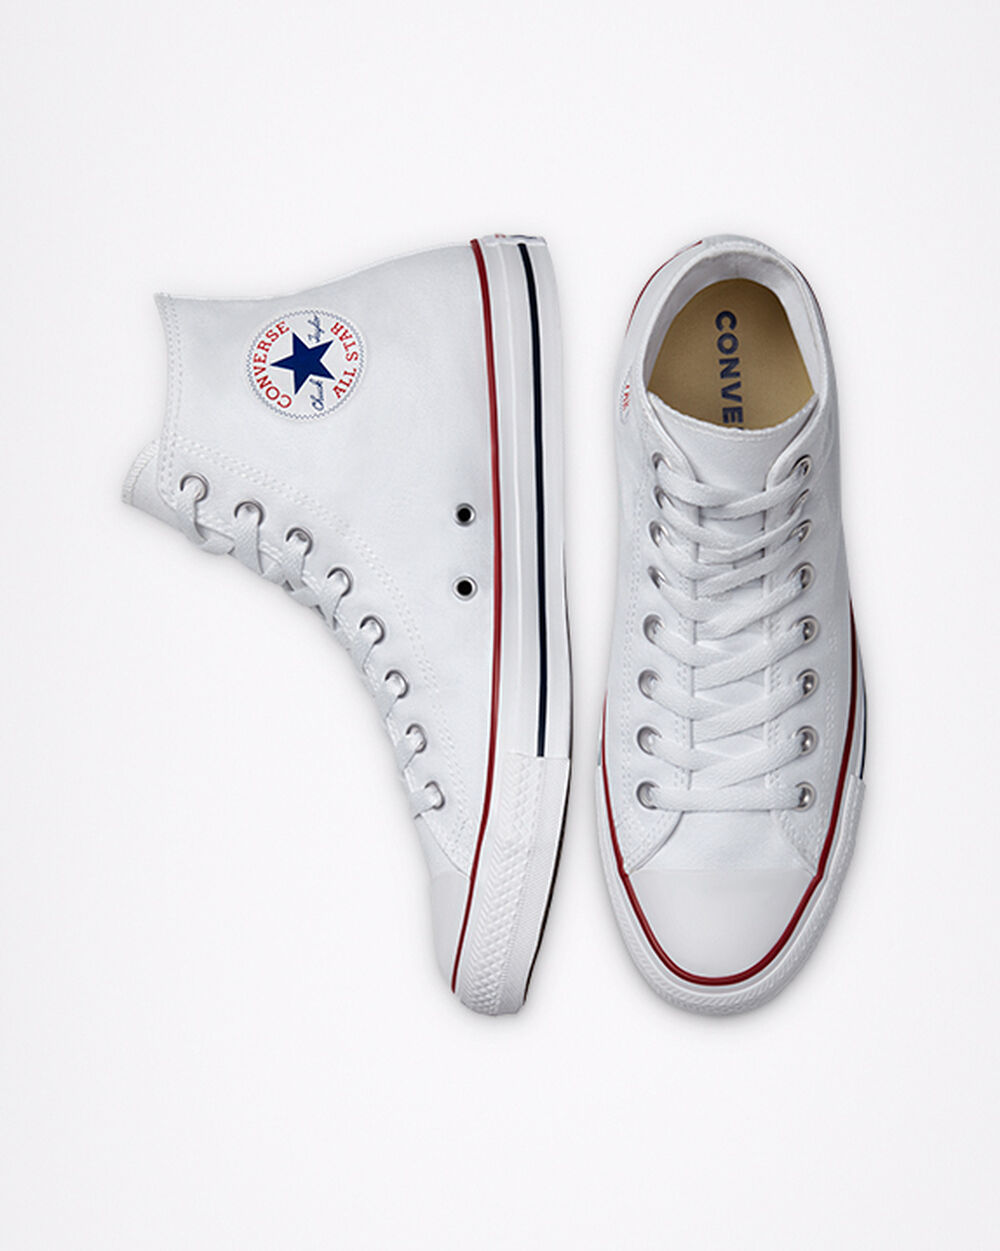 Tenis Converse Chuck Taylor All Star Mujer Blancos | Mexico-656846